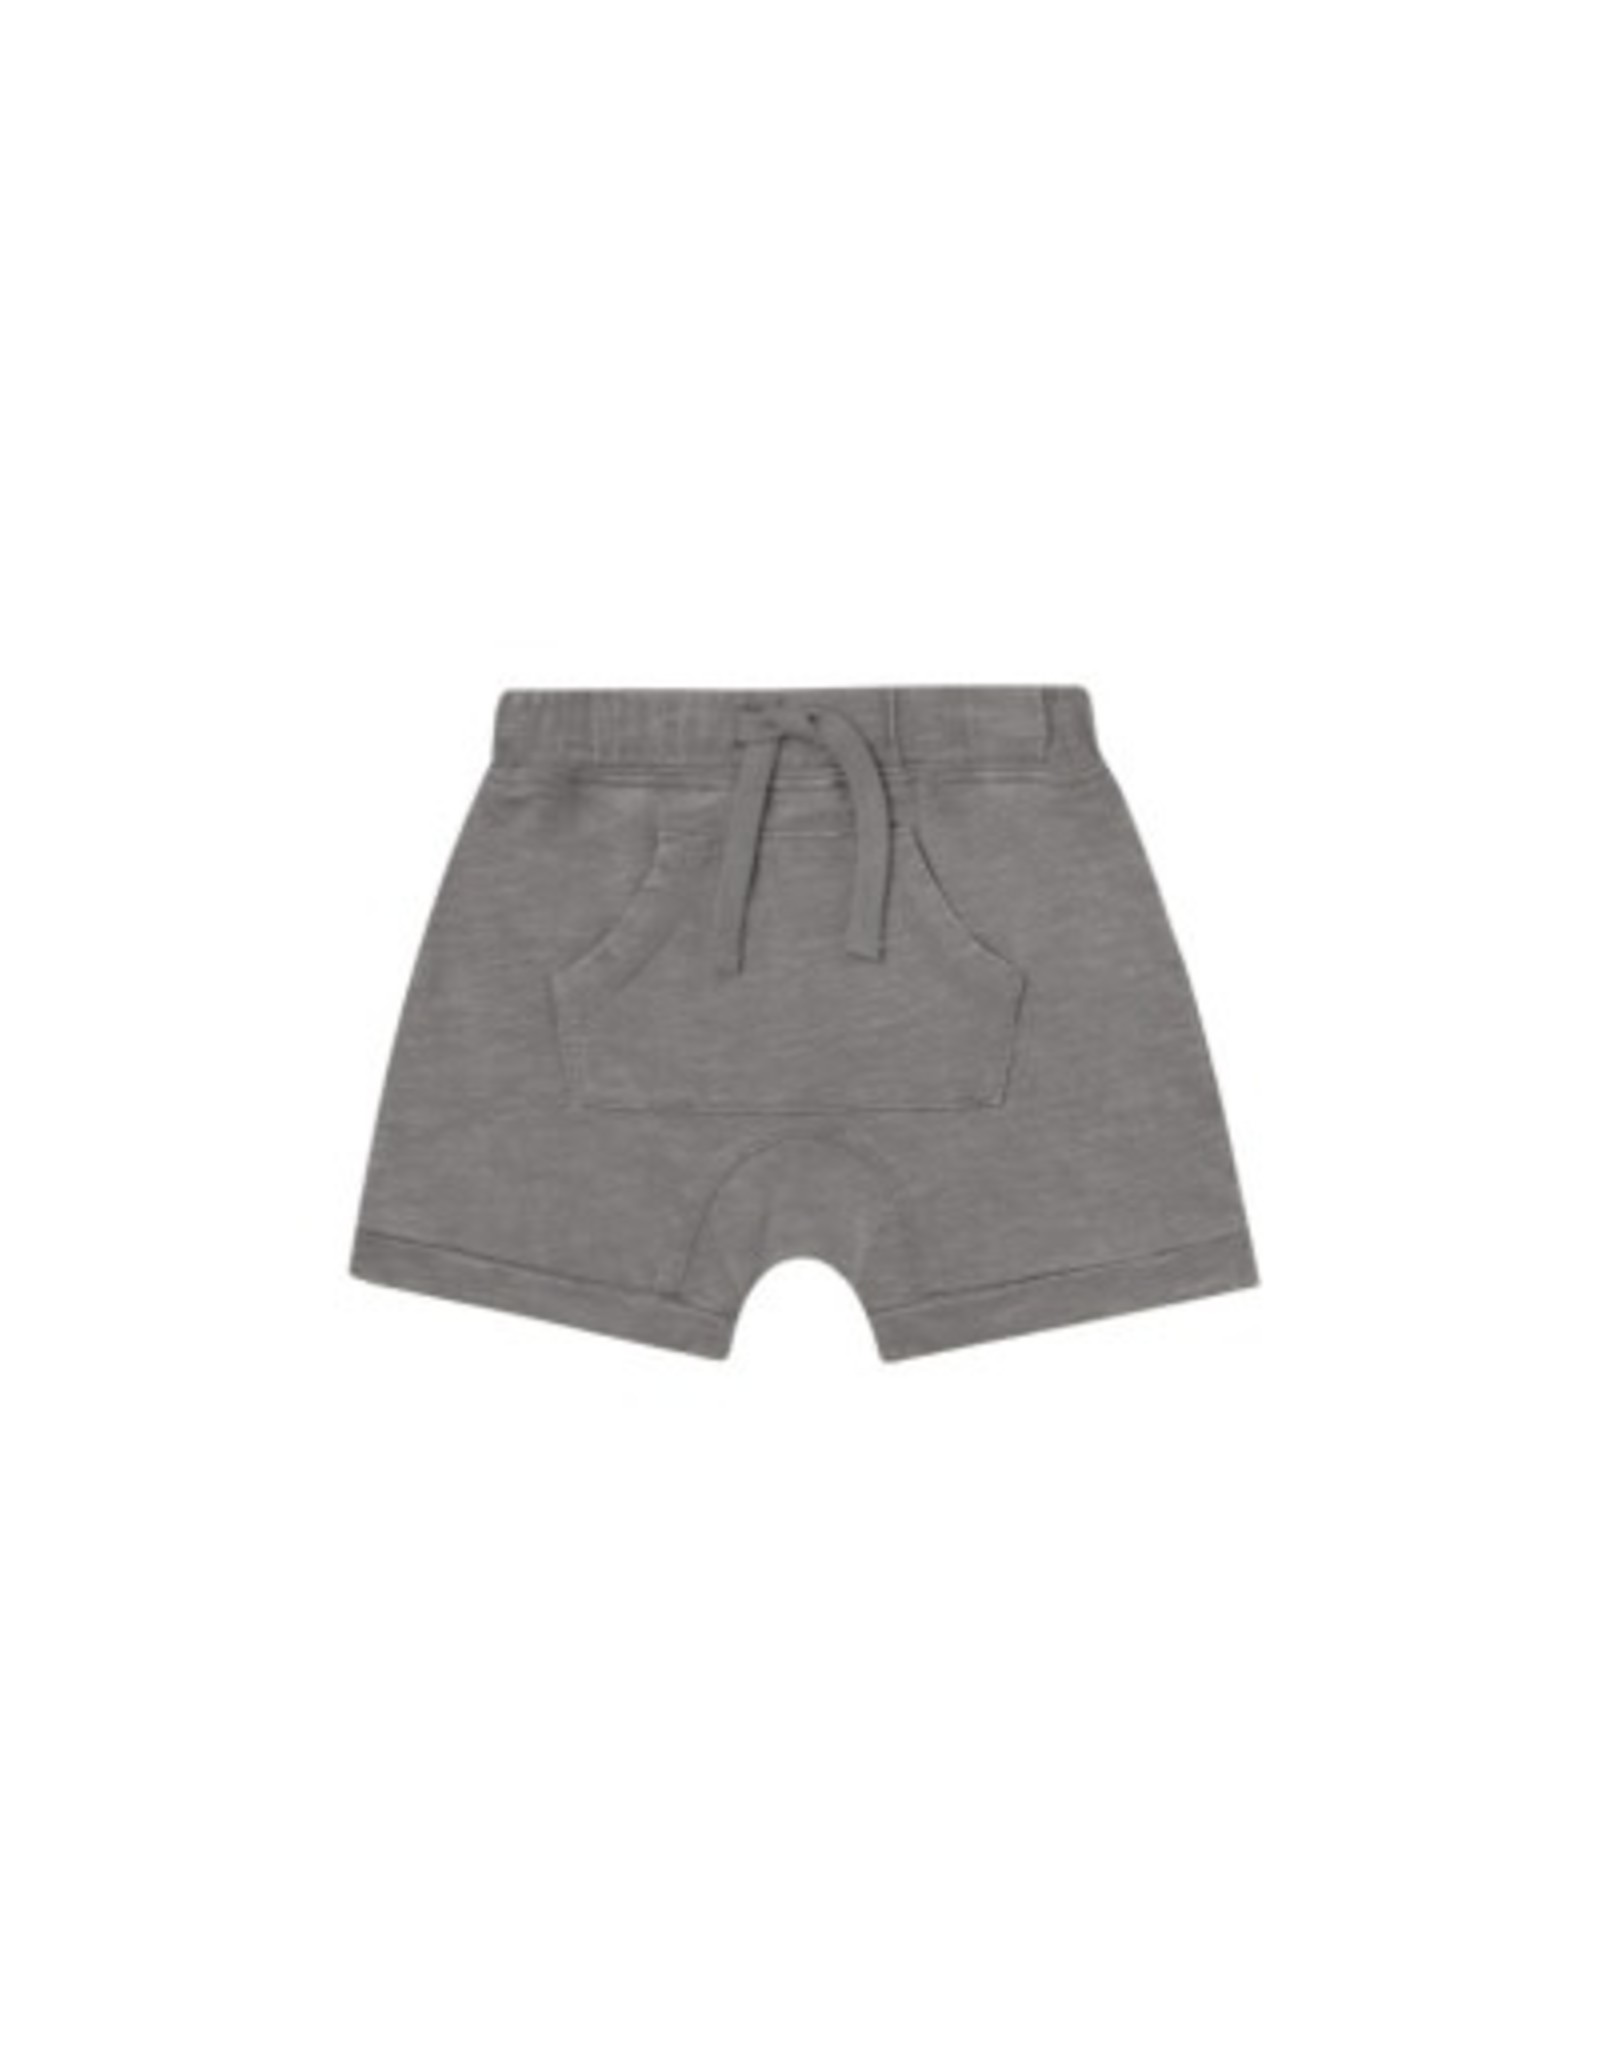 Rylee + Cru Inc. FRONT POUCH SHORT || INK